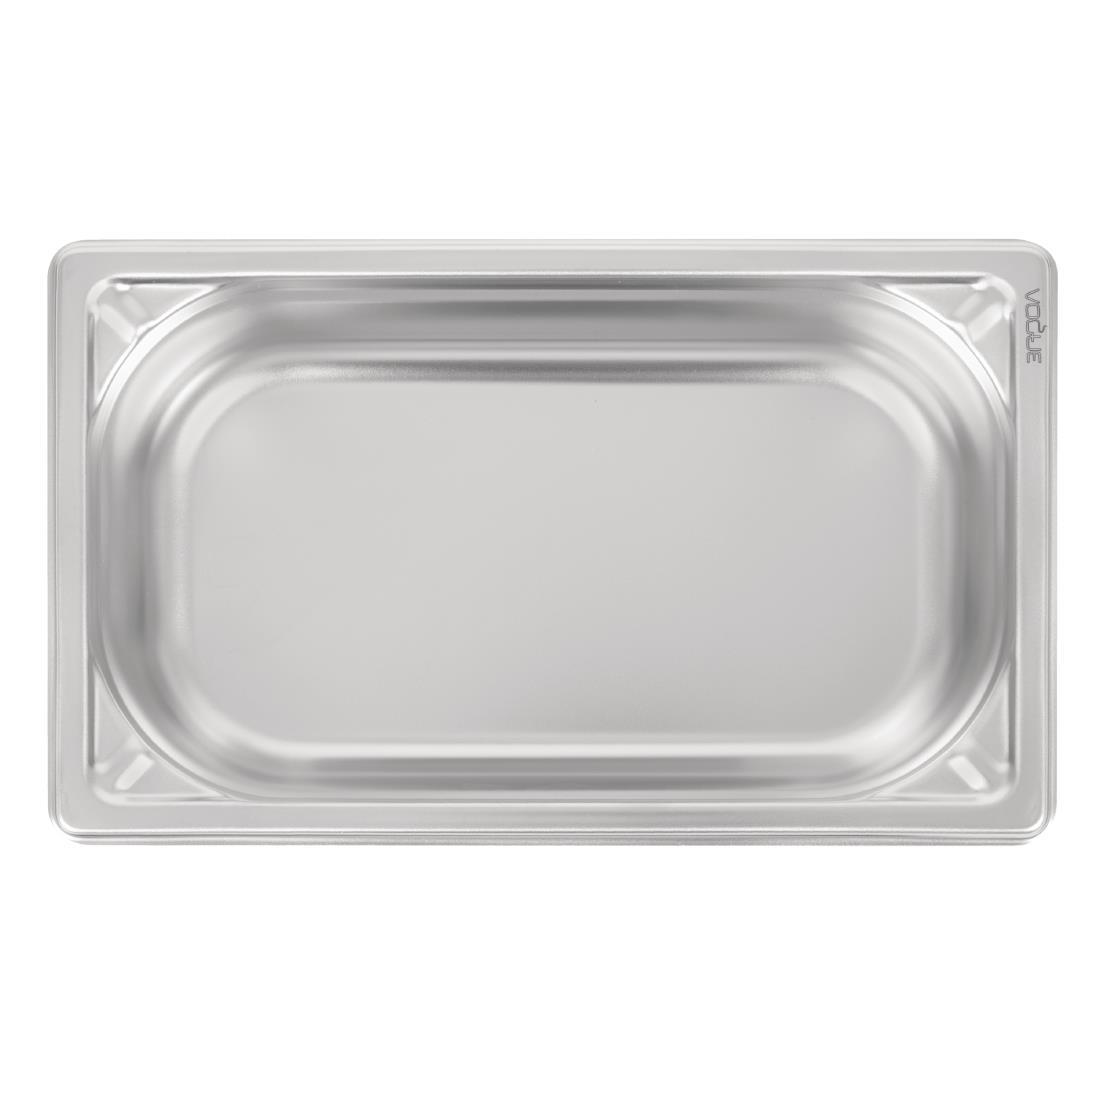 Vogue Heavy Duty Stainless Steel 1/4 Gastronorm Pan 65mm - DW446  - 4